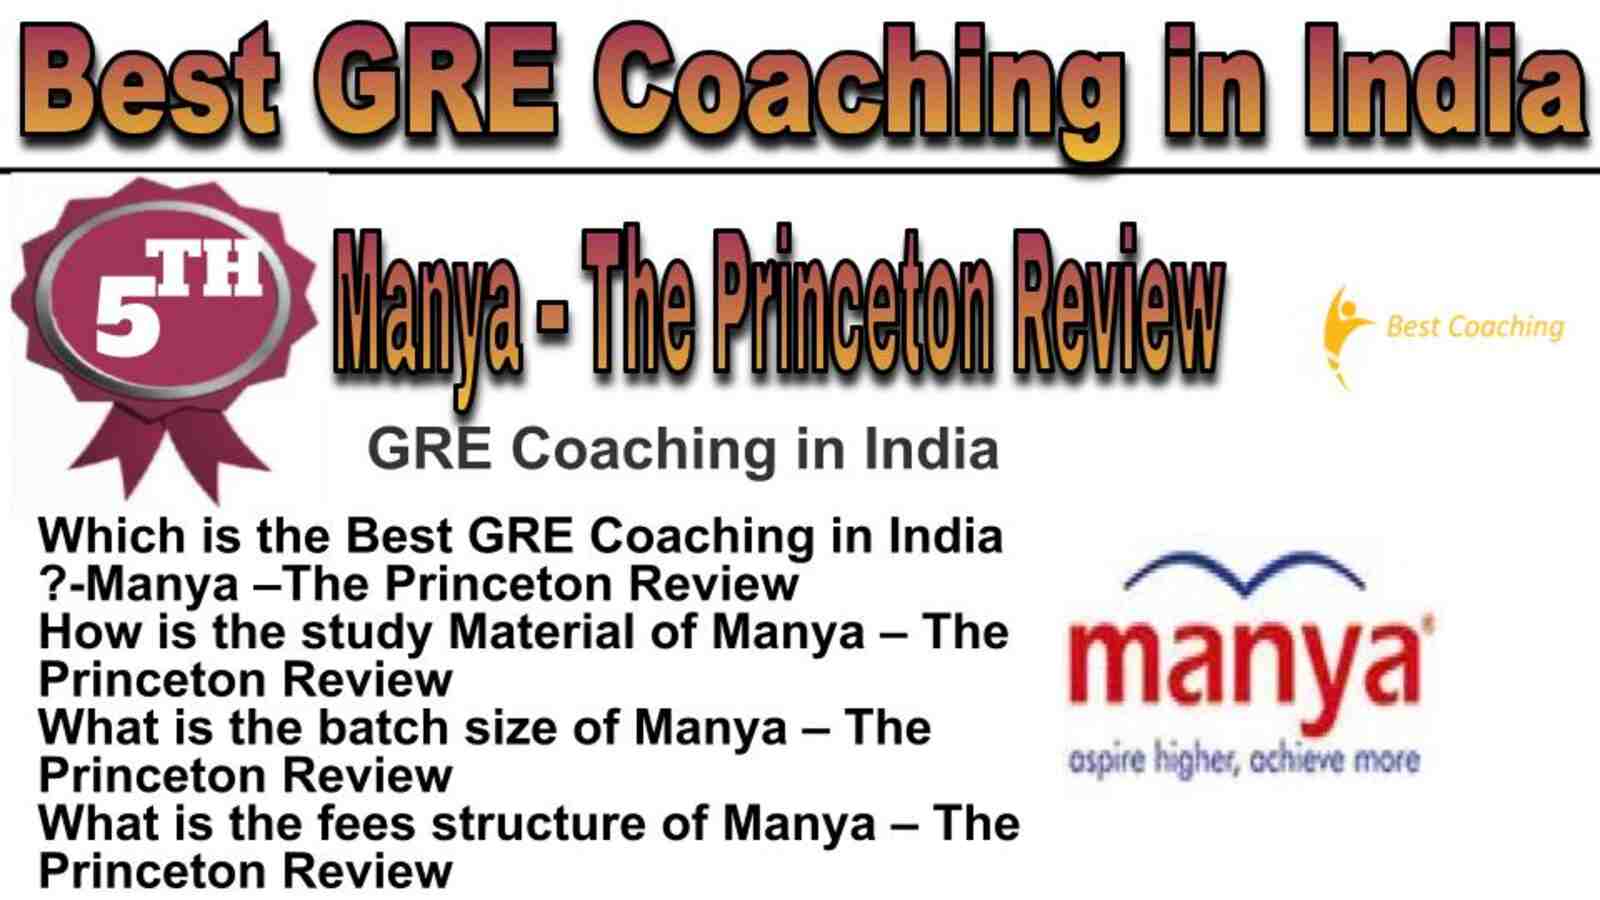 Rank 5 best GRE coaching in India